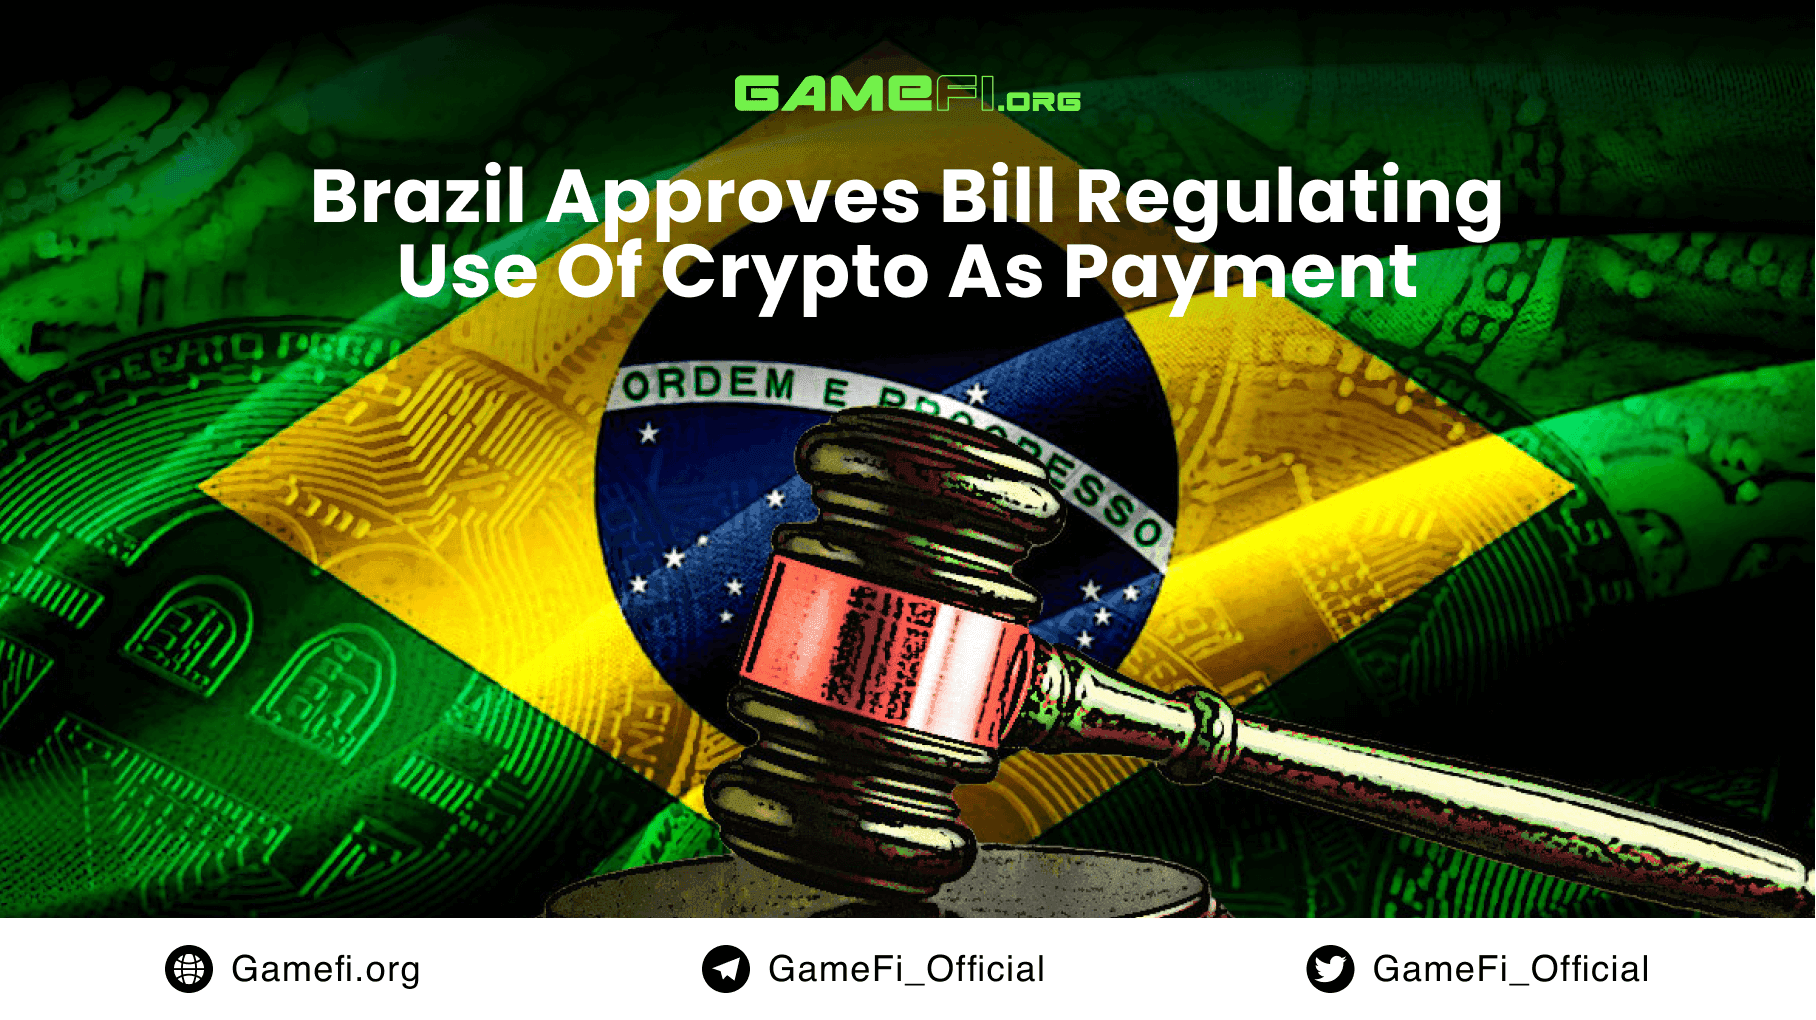 Brazil Approves Bill Regulating Use Of Crypto As Payment